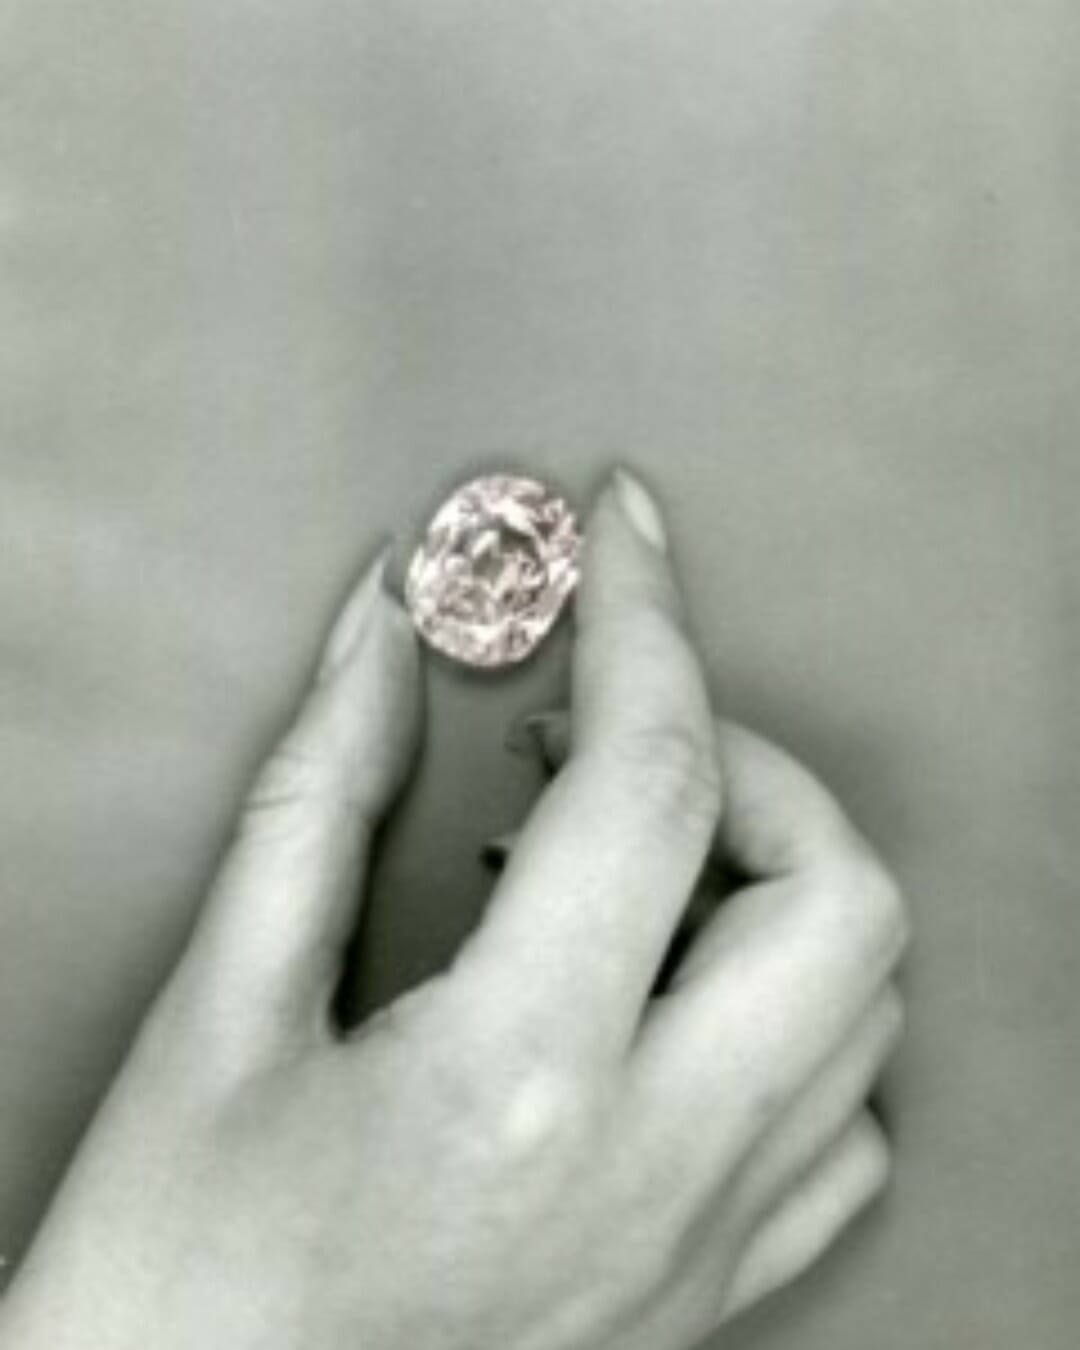 How Buccellati jewellery stays timeless: heiress Maria Cristina reflects on  the brand's ability to be both modern and old